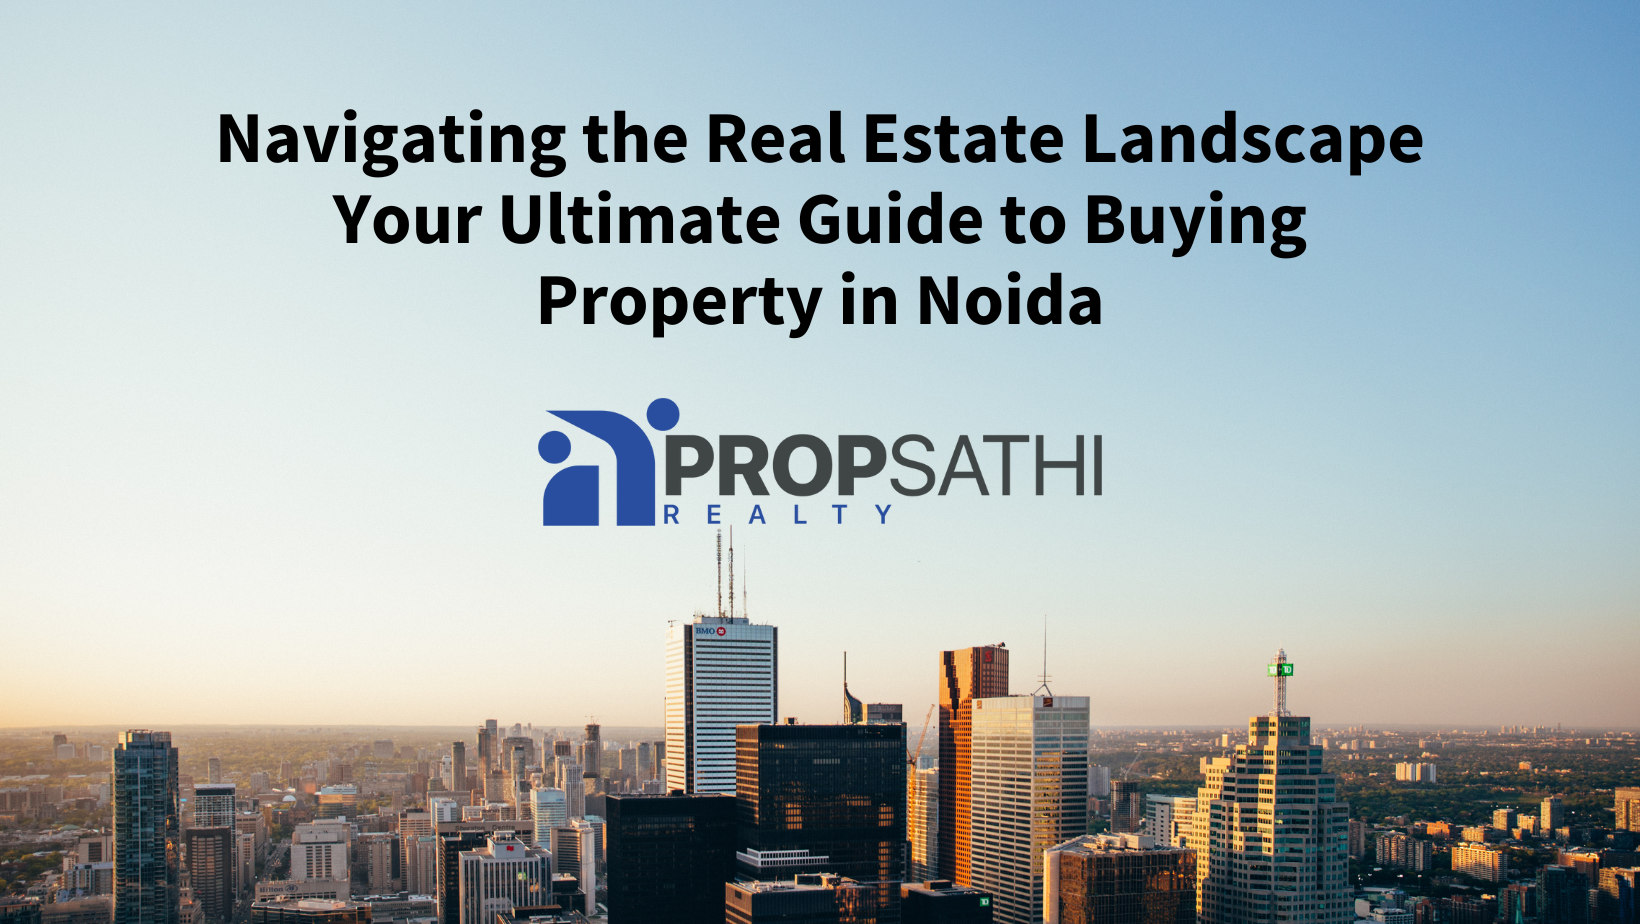 Navigating the Real Estate Landscape | Your Ultimate Guide to Buying Property in Noida